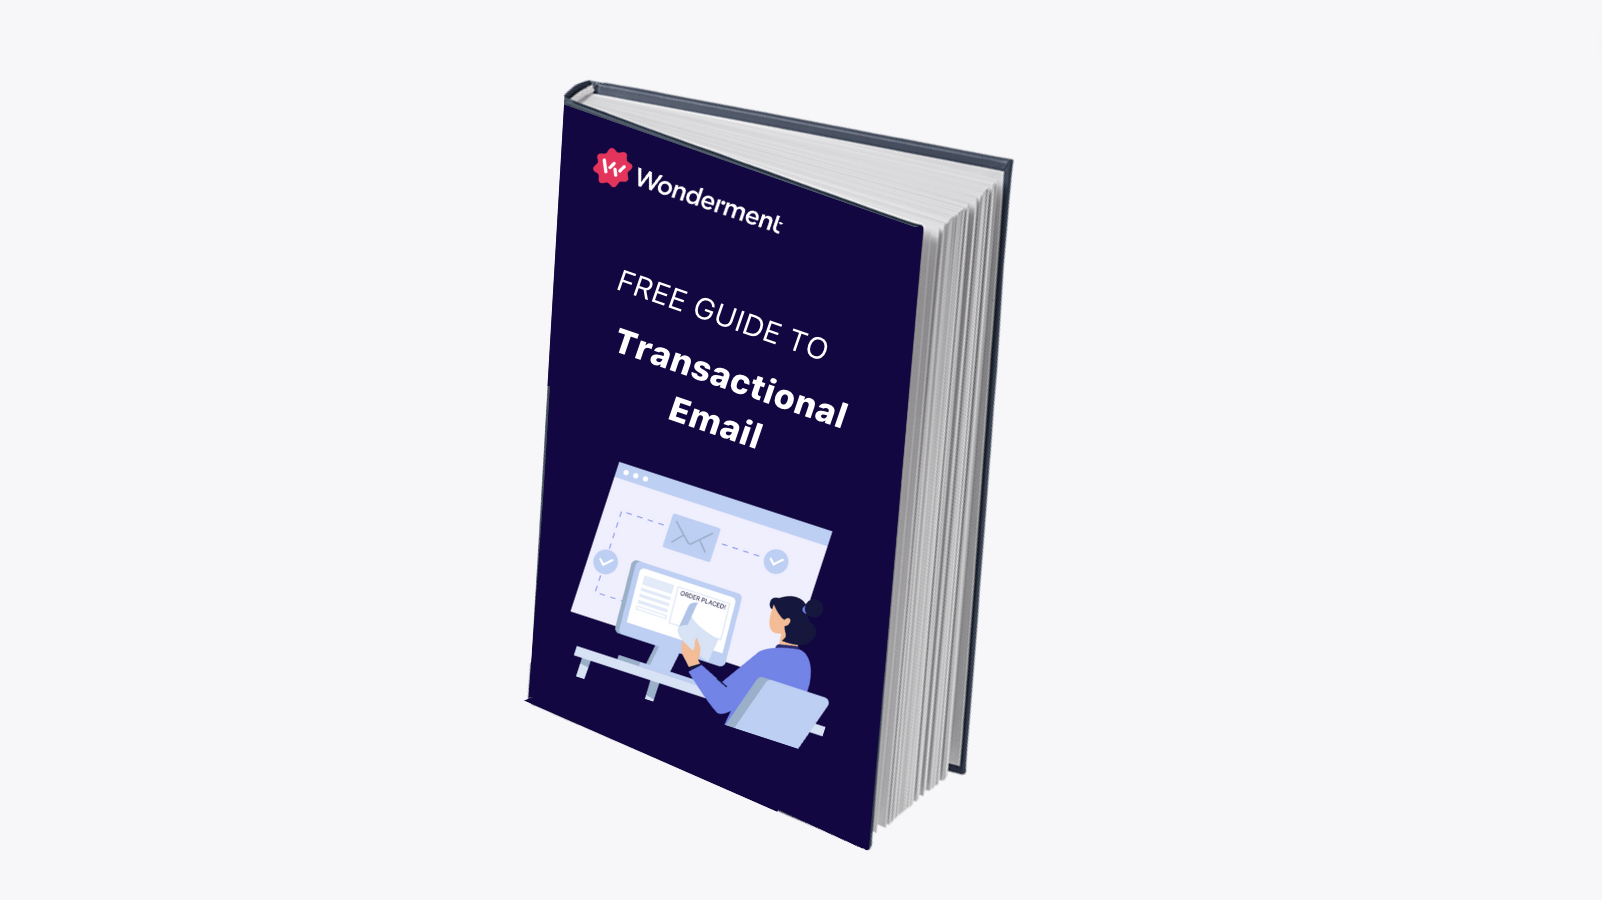 Free Guide To Transactional Email